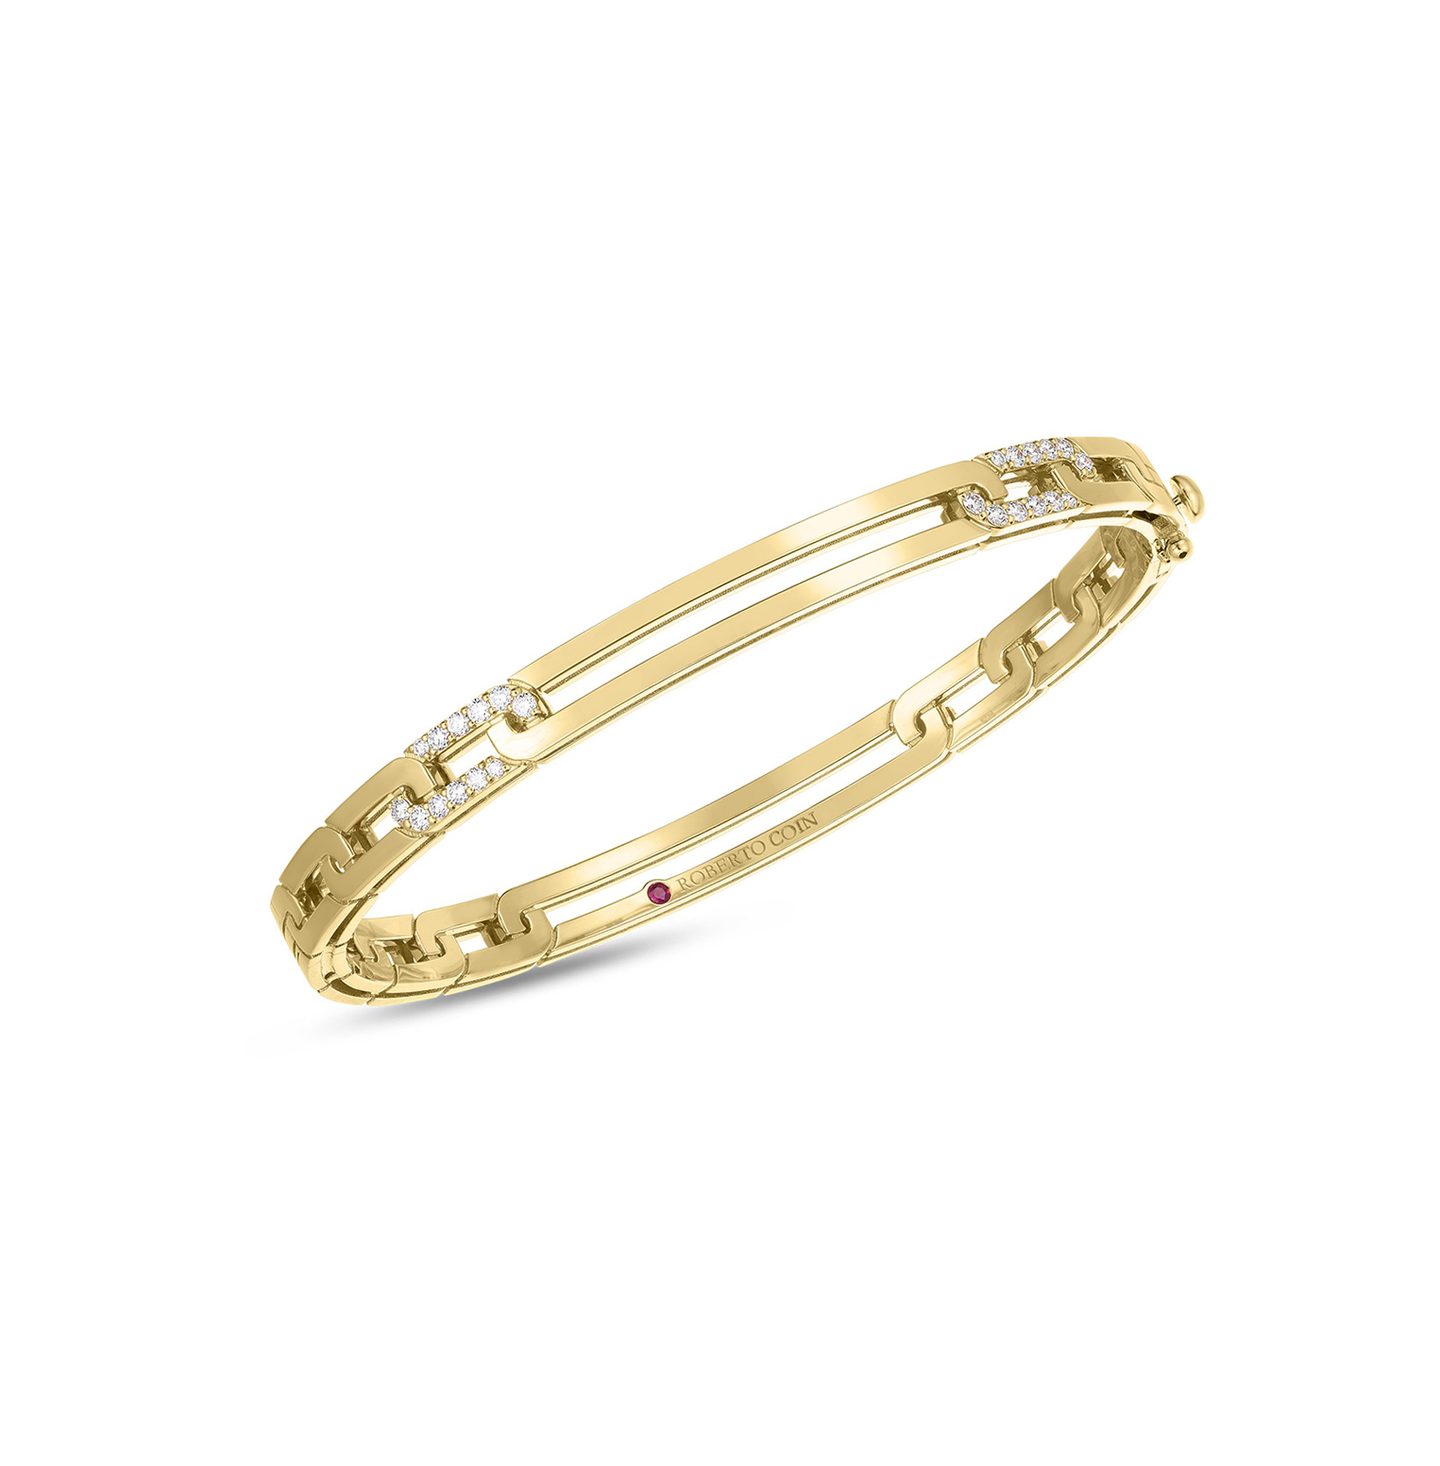 Roberto Coin Navarra Yellow Gold Extended Link Bangle with Diamonds